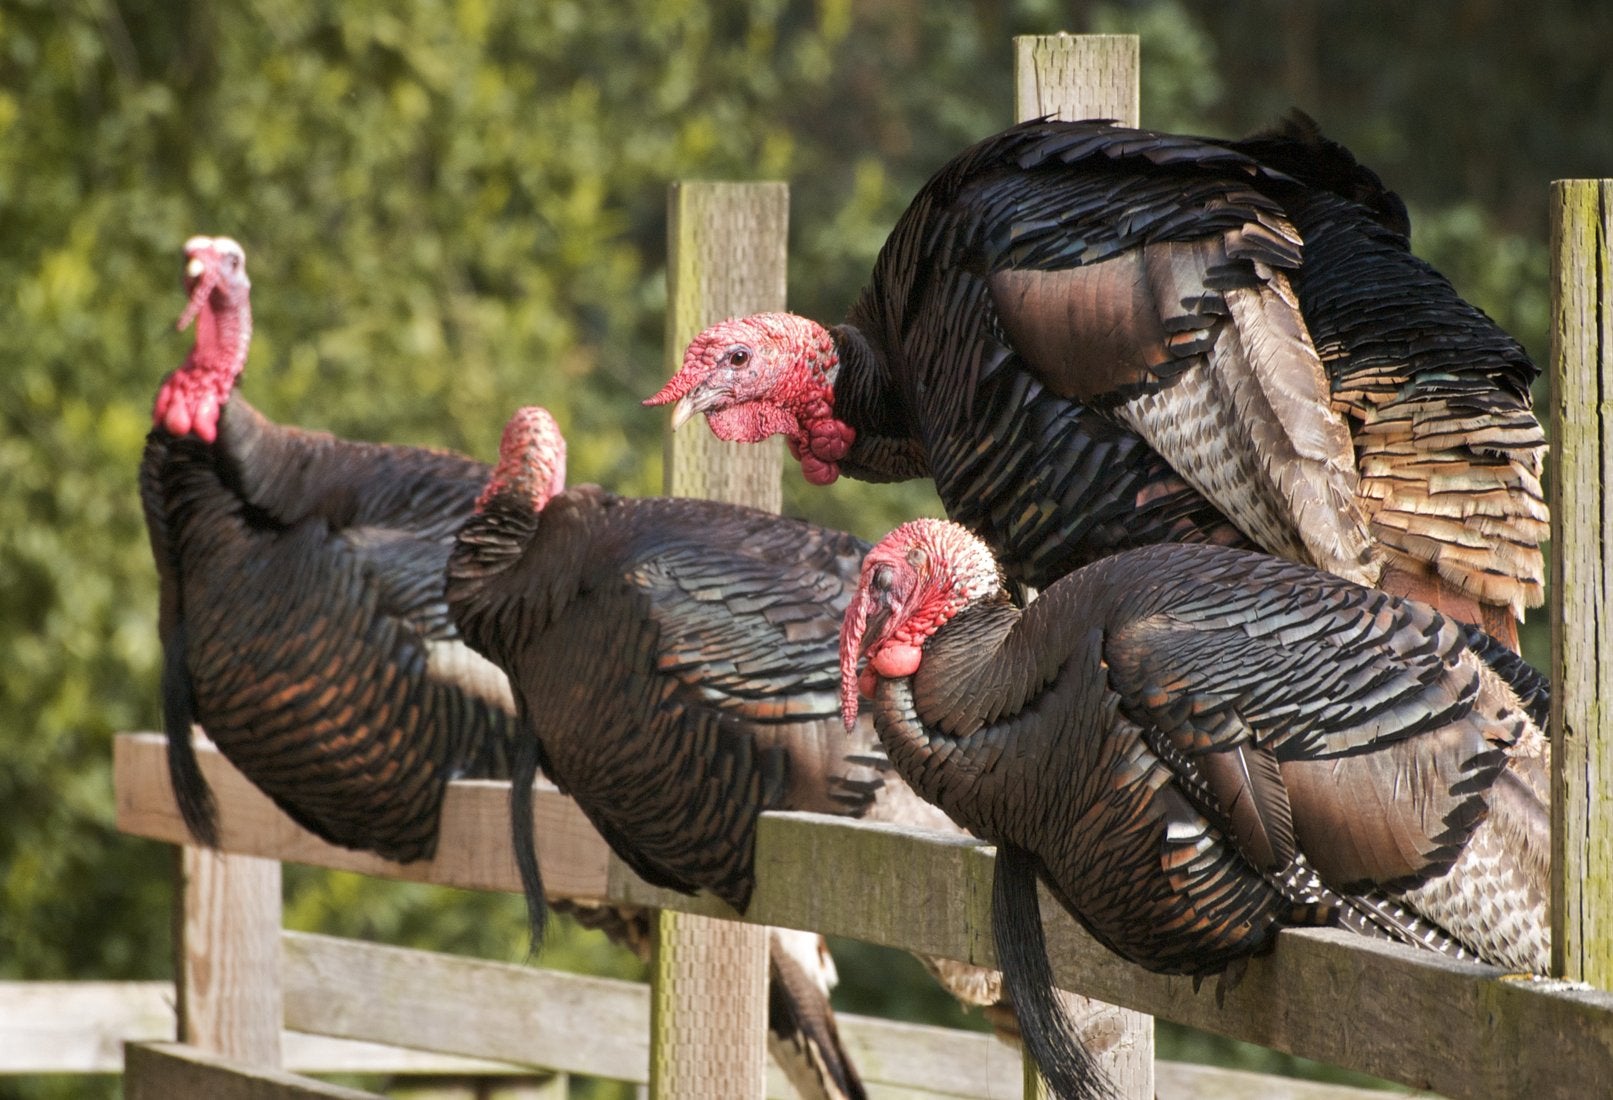 Celebrate Thanksgiving Year 'Round with Turkeys on the Farm Beginning Farmers